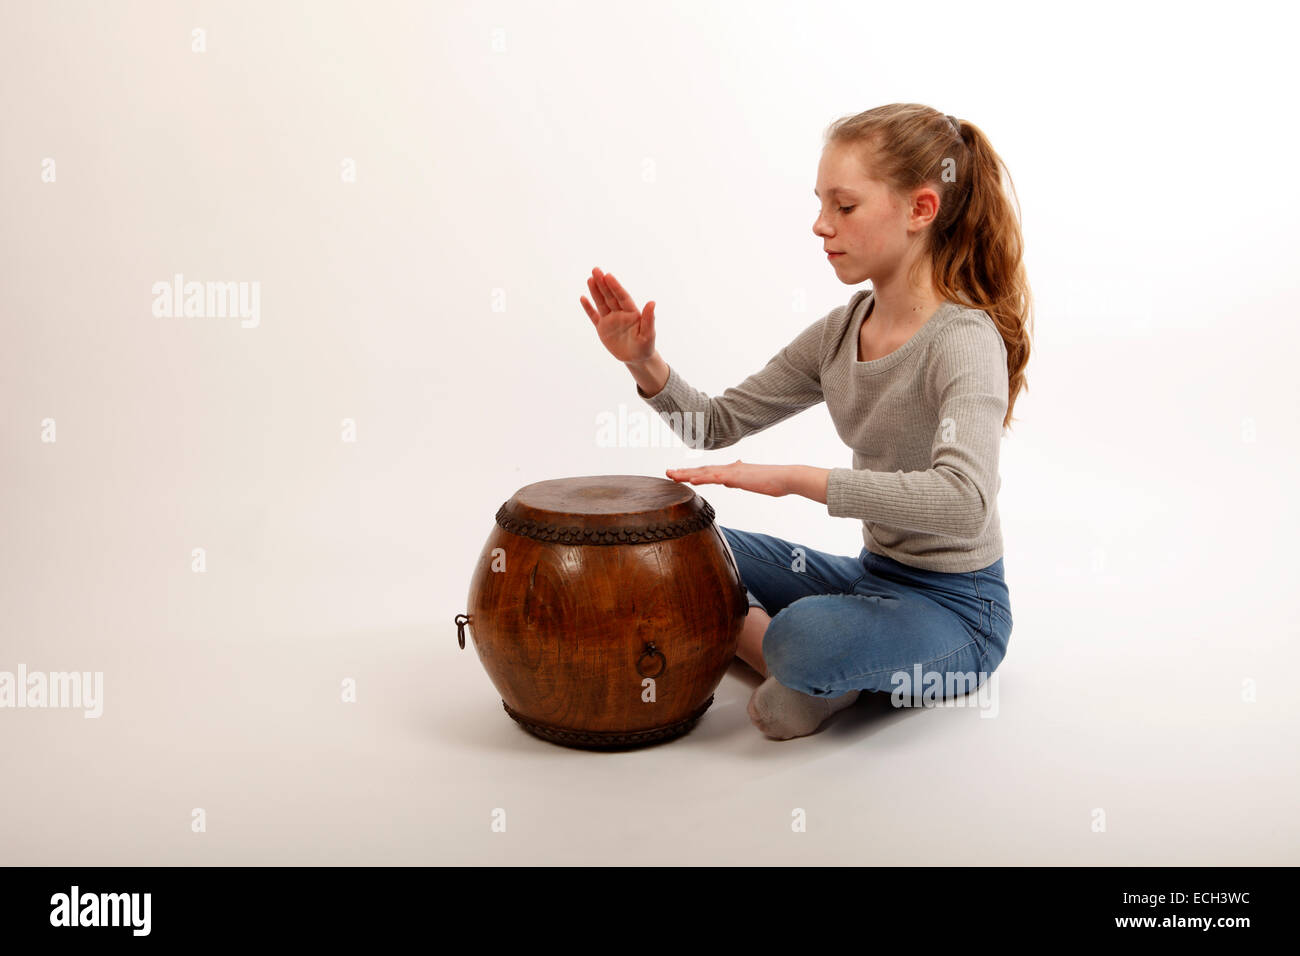 young girl playing a hand drum, a chinese double headed tom tom Stock Photo